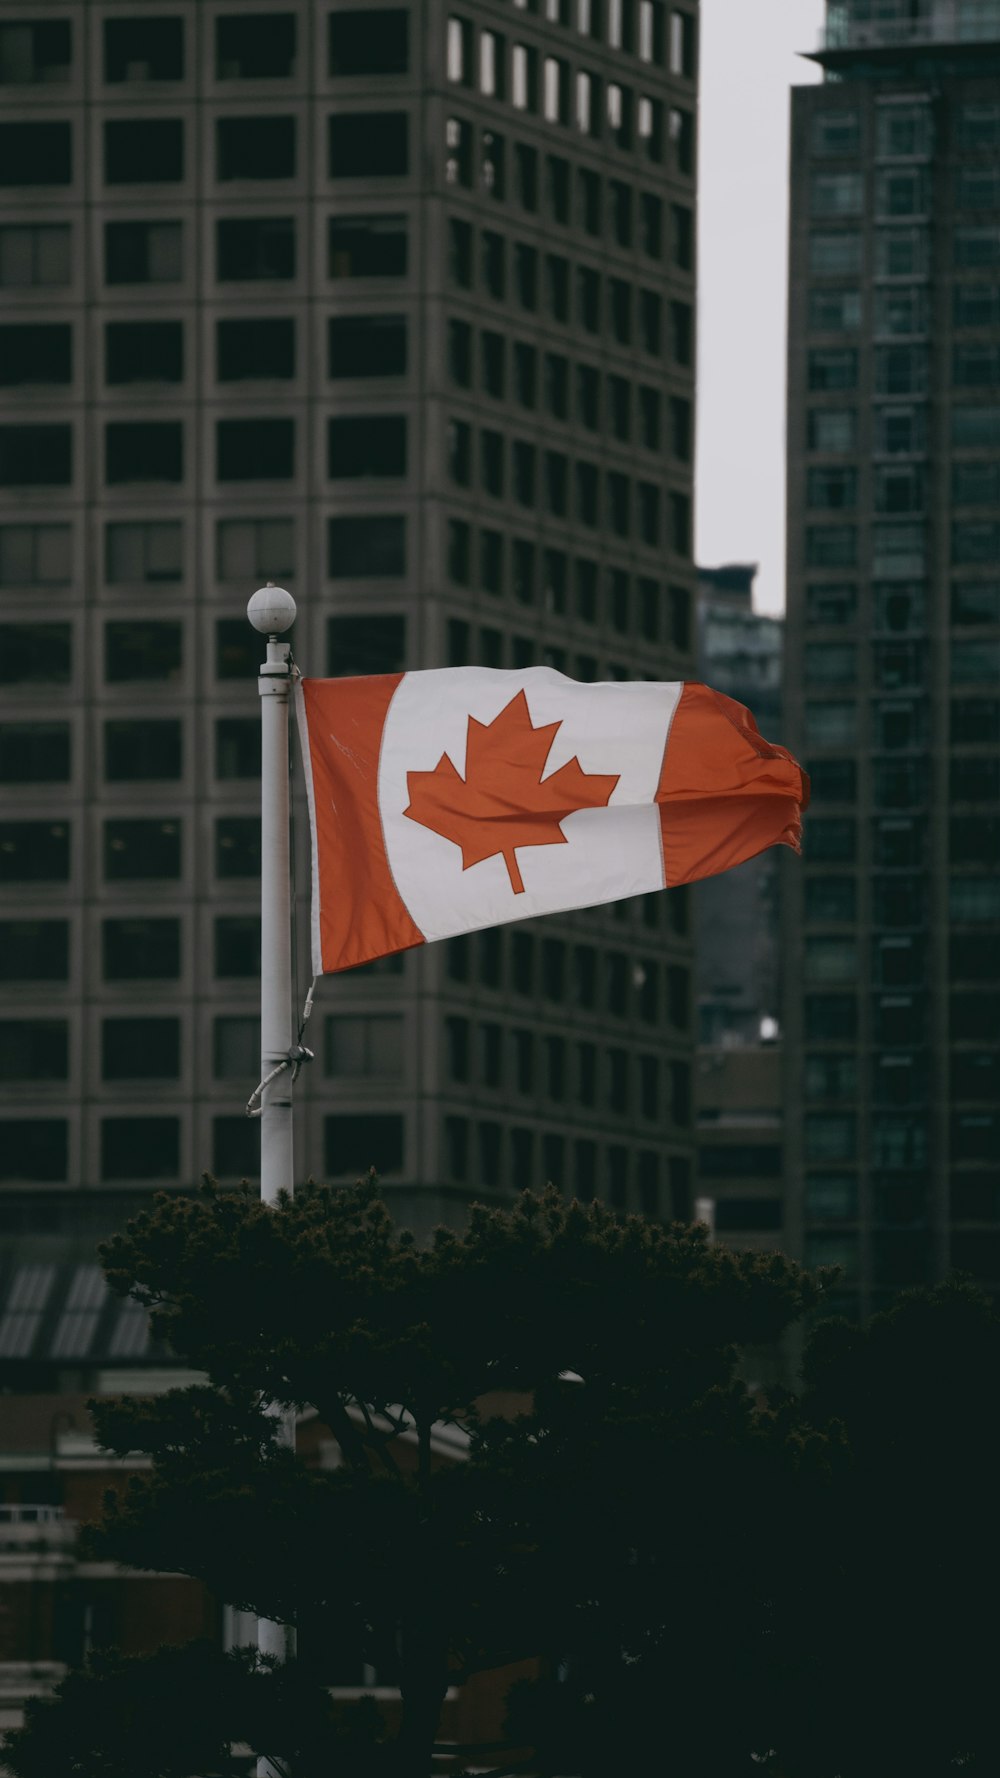 a canadian flag flying in the wind in a city